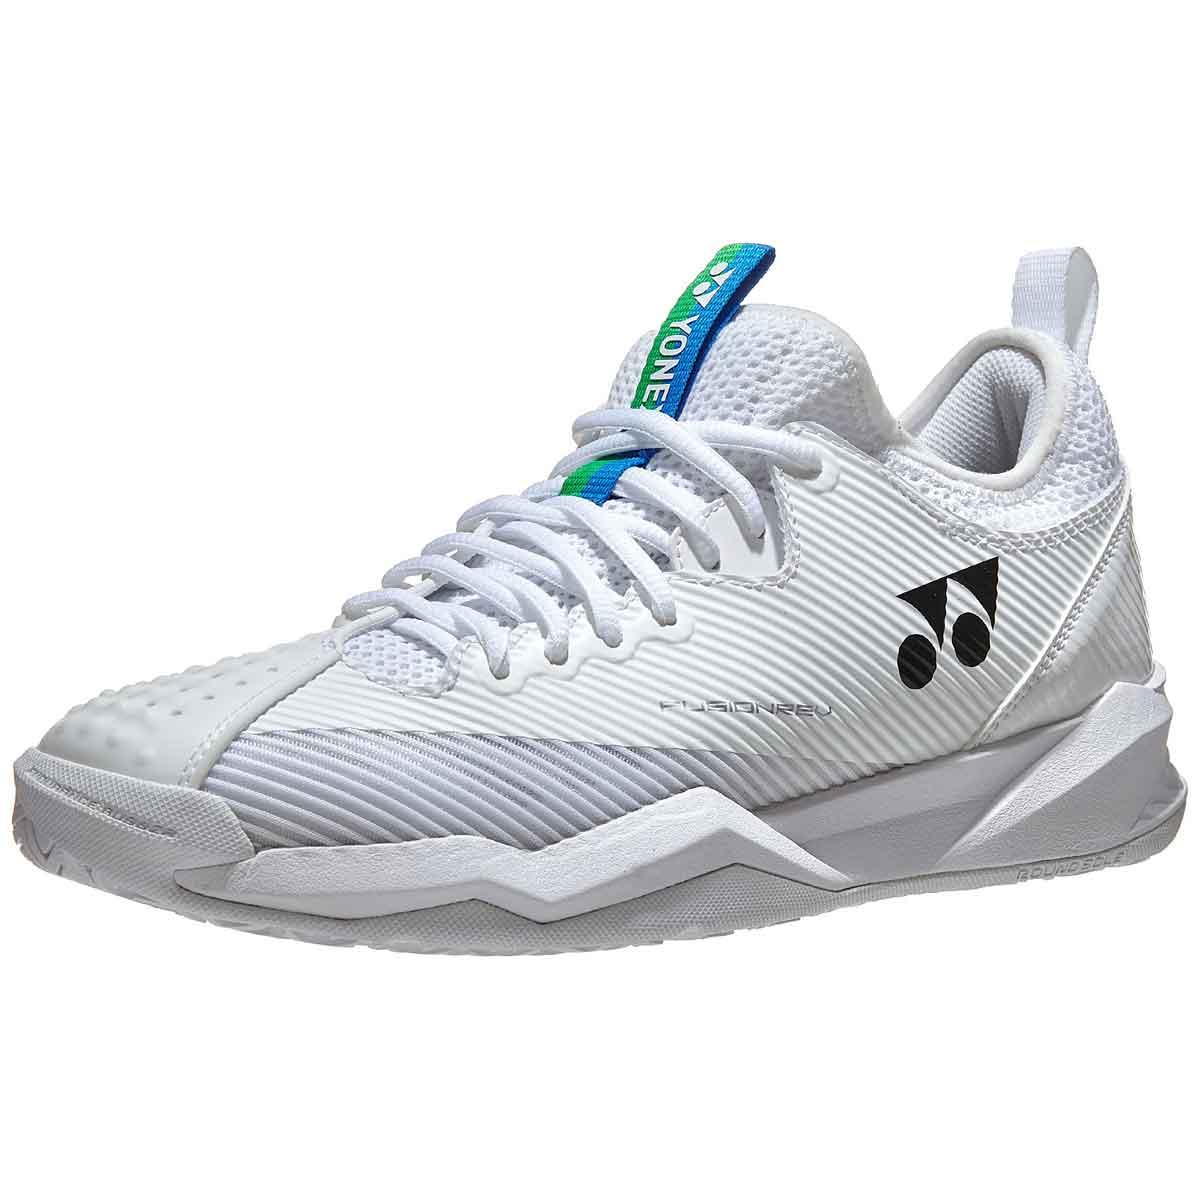 Buy Yonex 75th Limited Edition FUSIONREV 4 Tennis Shoes (White) Online India